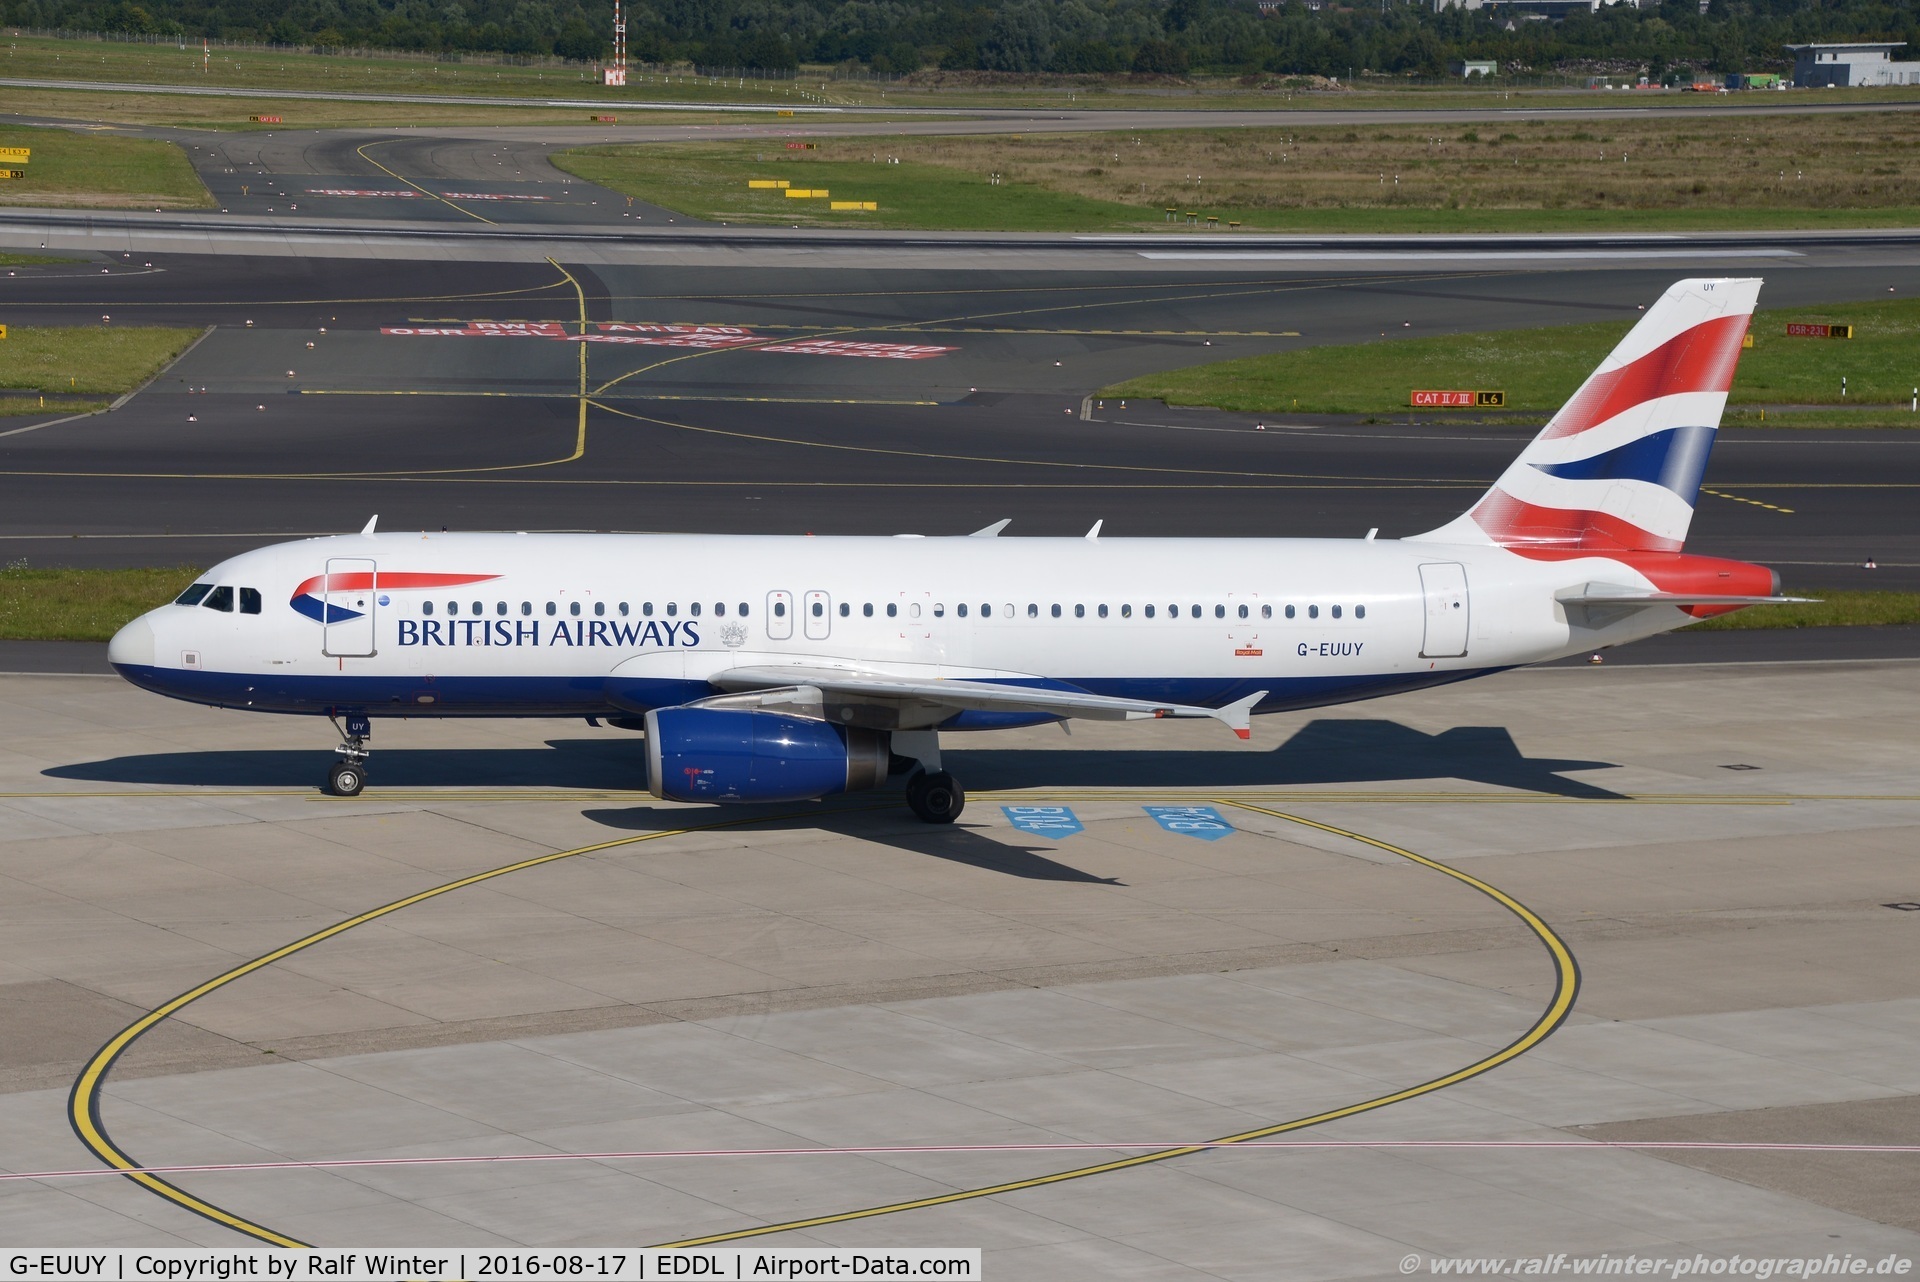 G-EUUY, 2008 Airbus A320-232 C/N 3607, Airbus A320-232 - BAW BA British Airways - 3607 - G-EUUY - 17.08.2016 - DUS